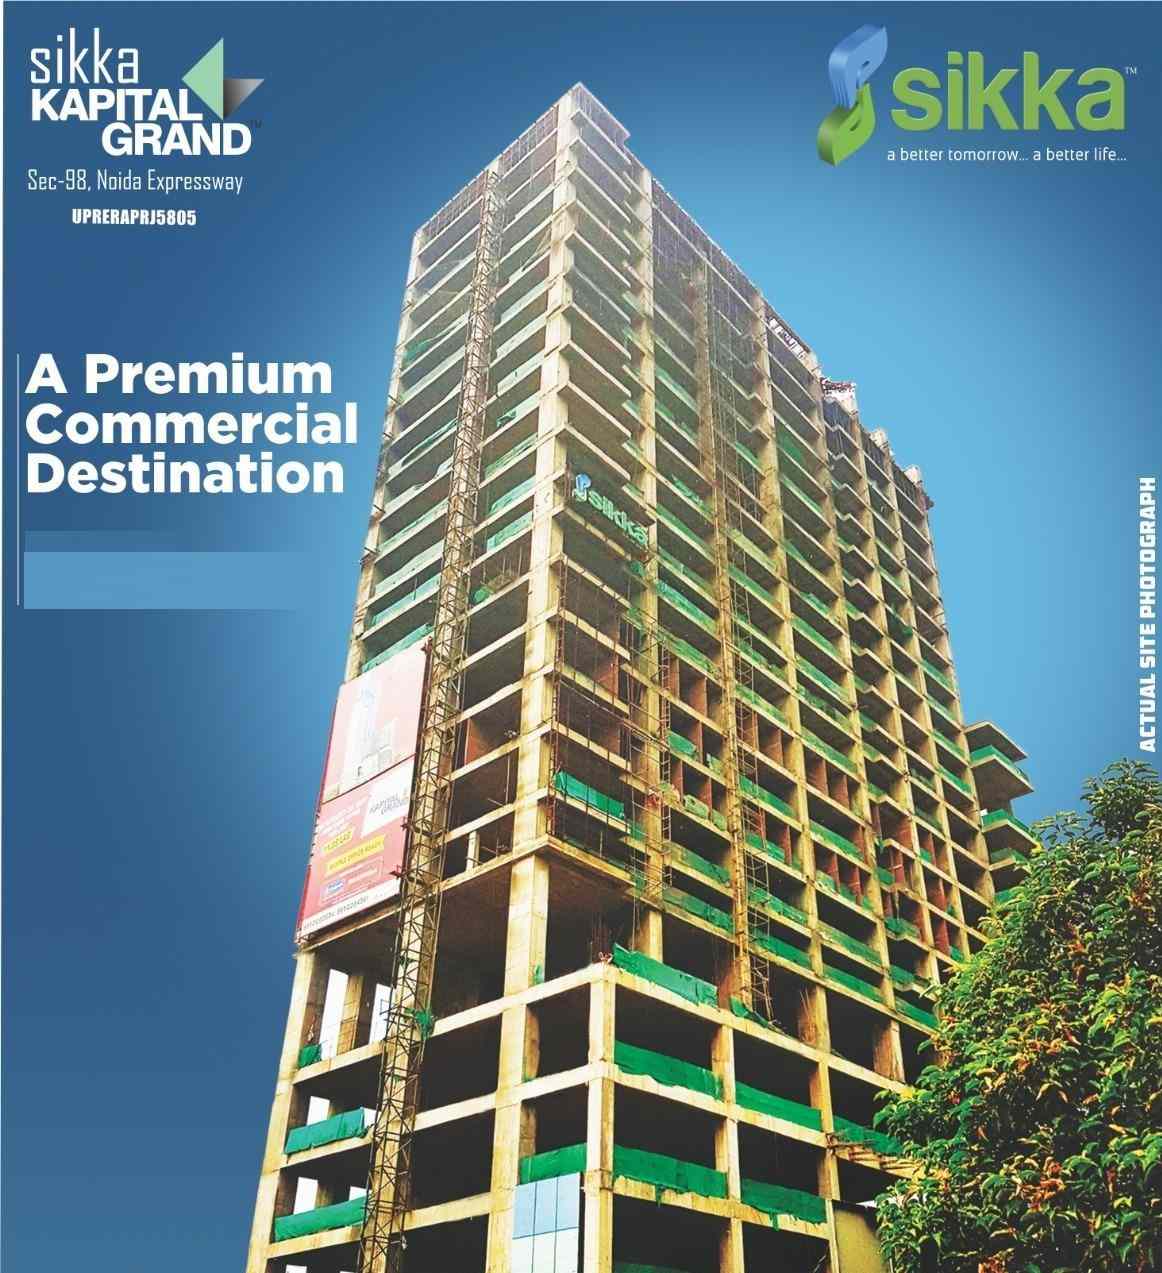 Book the perfect place for your office at Sikka The Downtown Kapital Grand in Noida